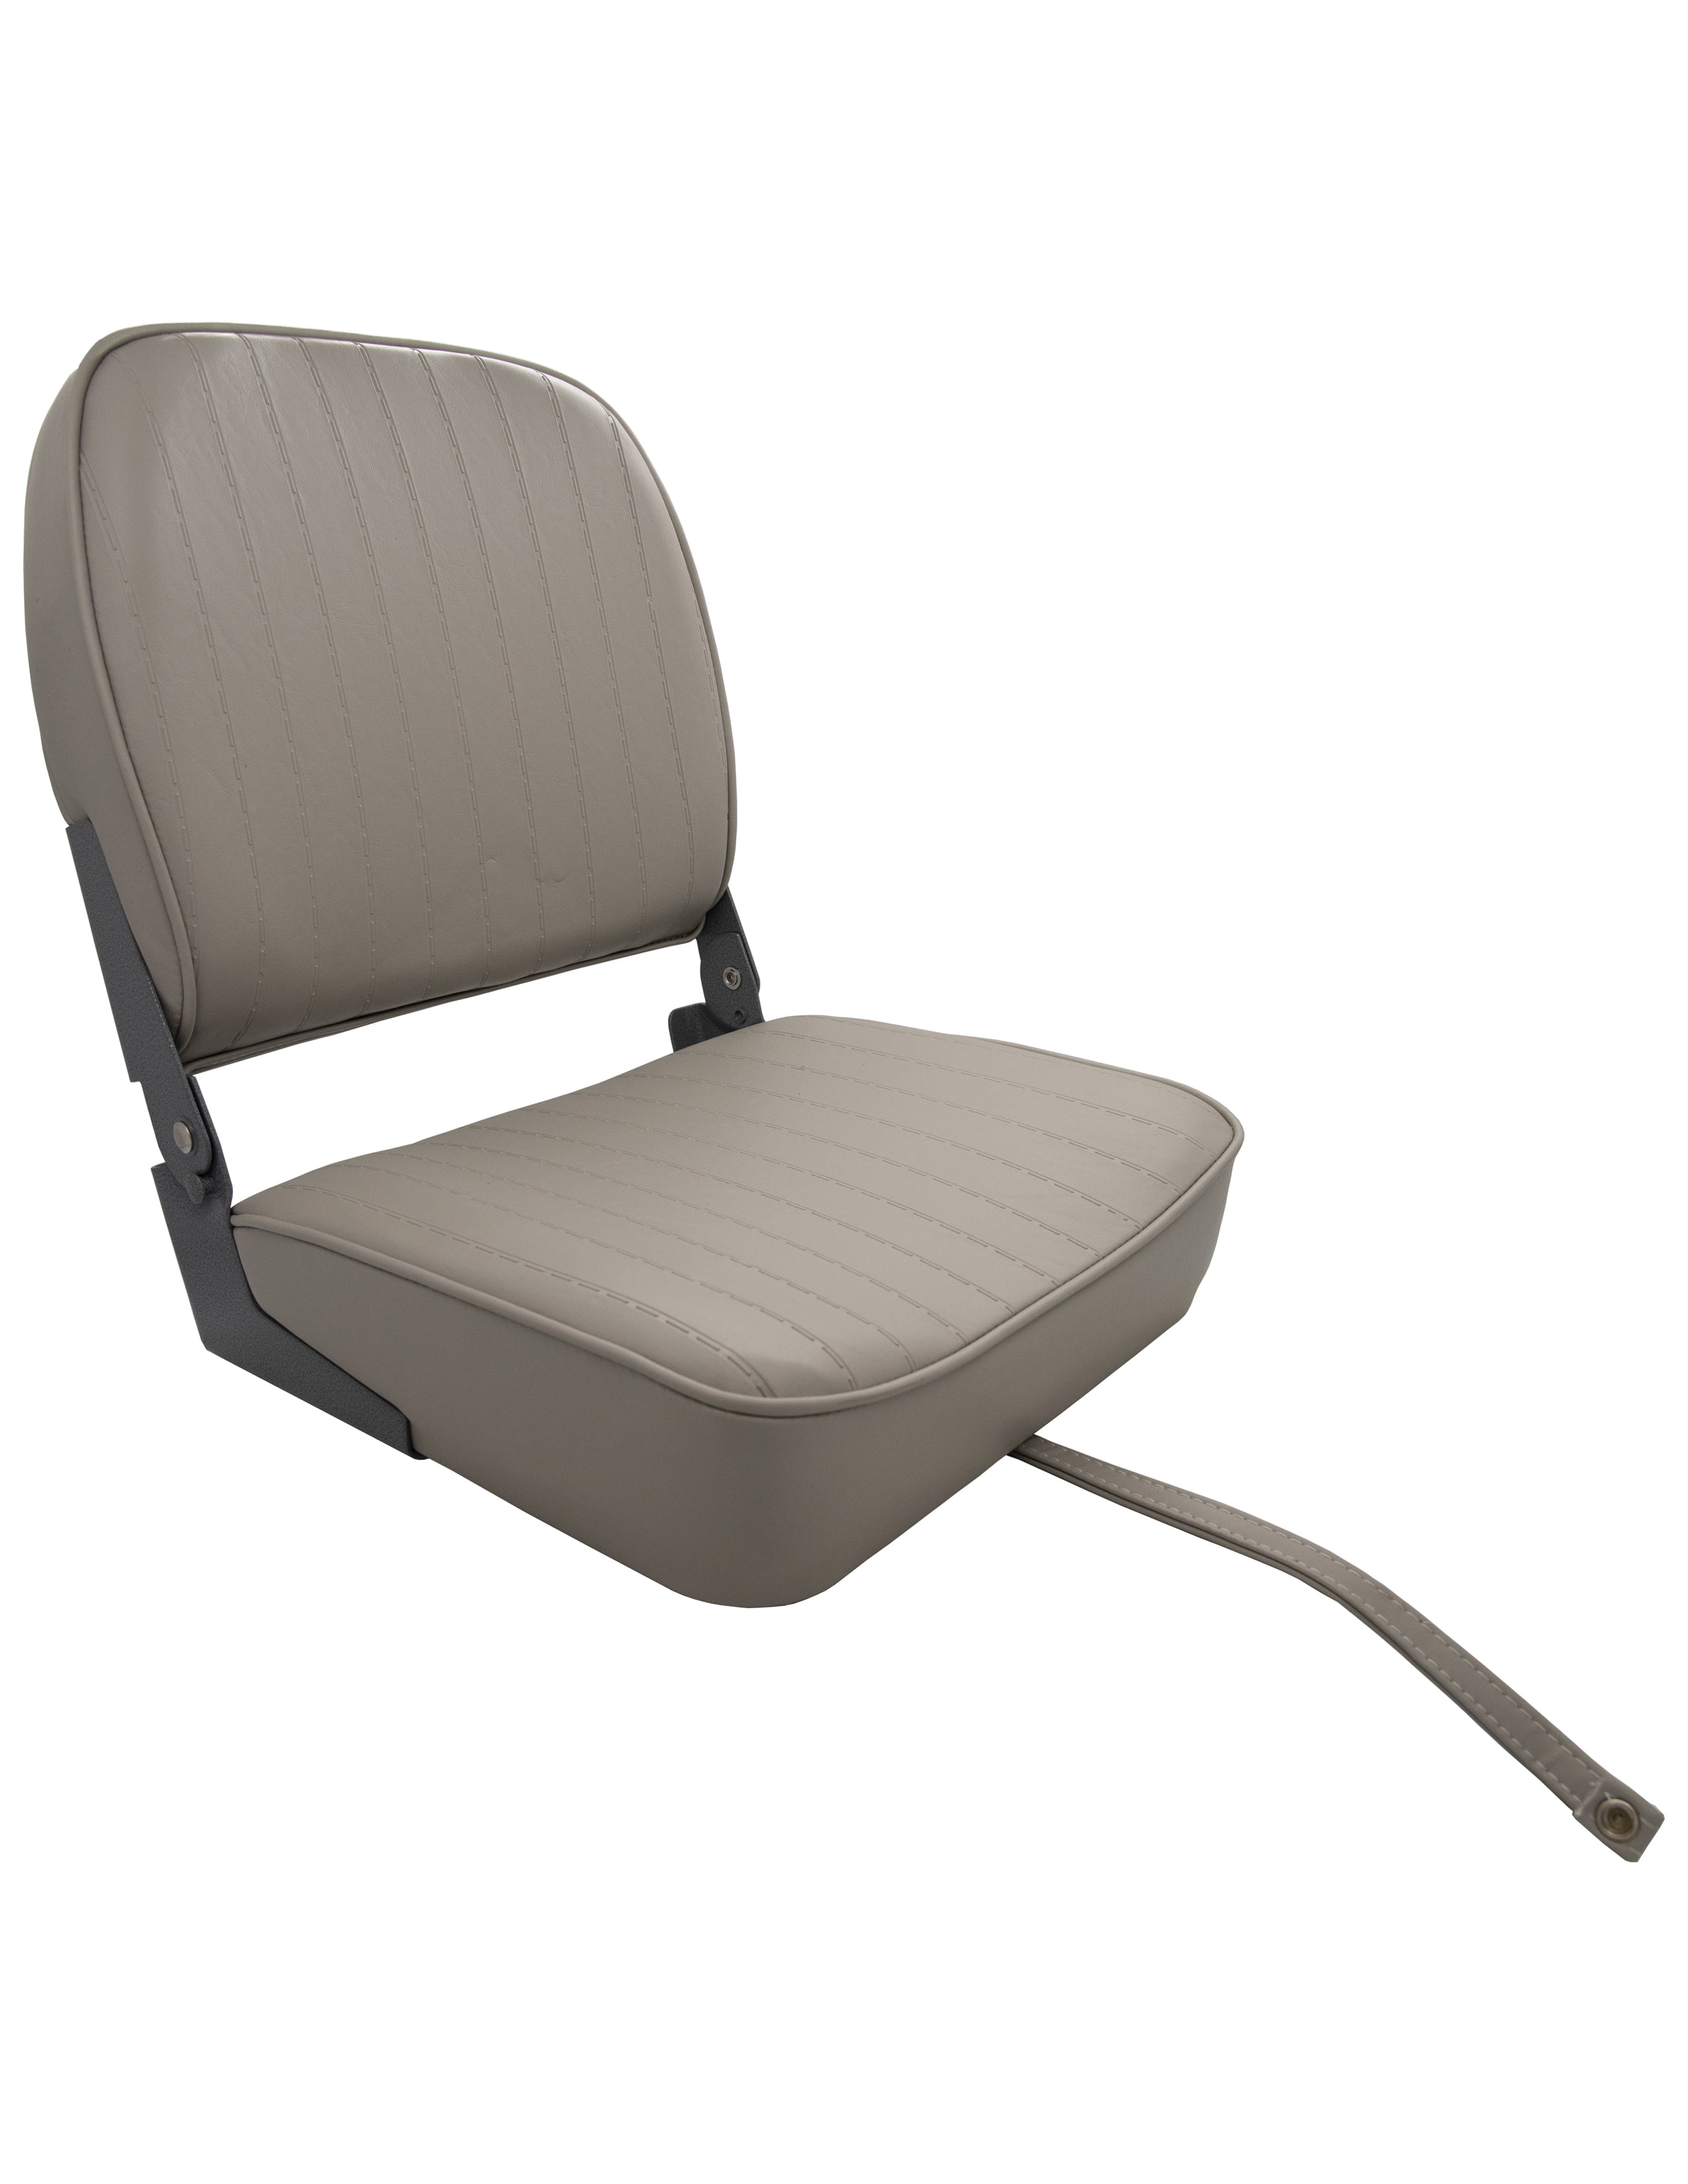 Low Back Fishing Boat Seat Chair Wise Folding Economy Comfort for sale online 